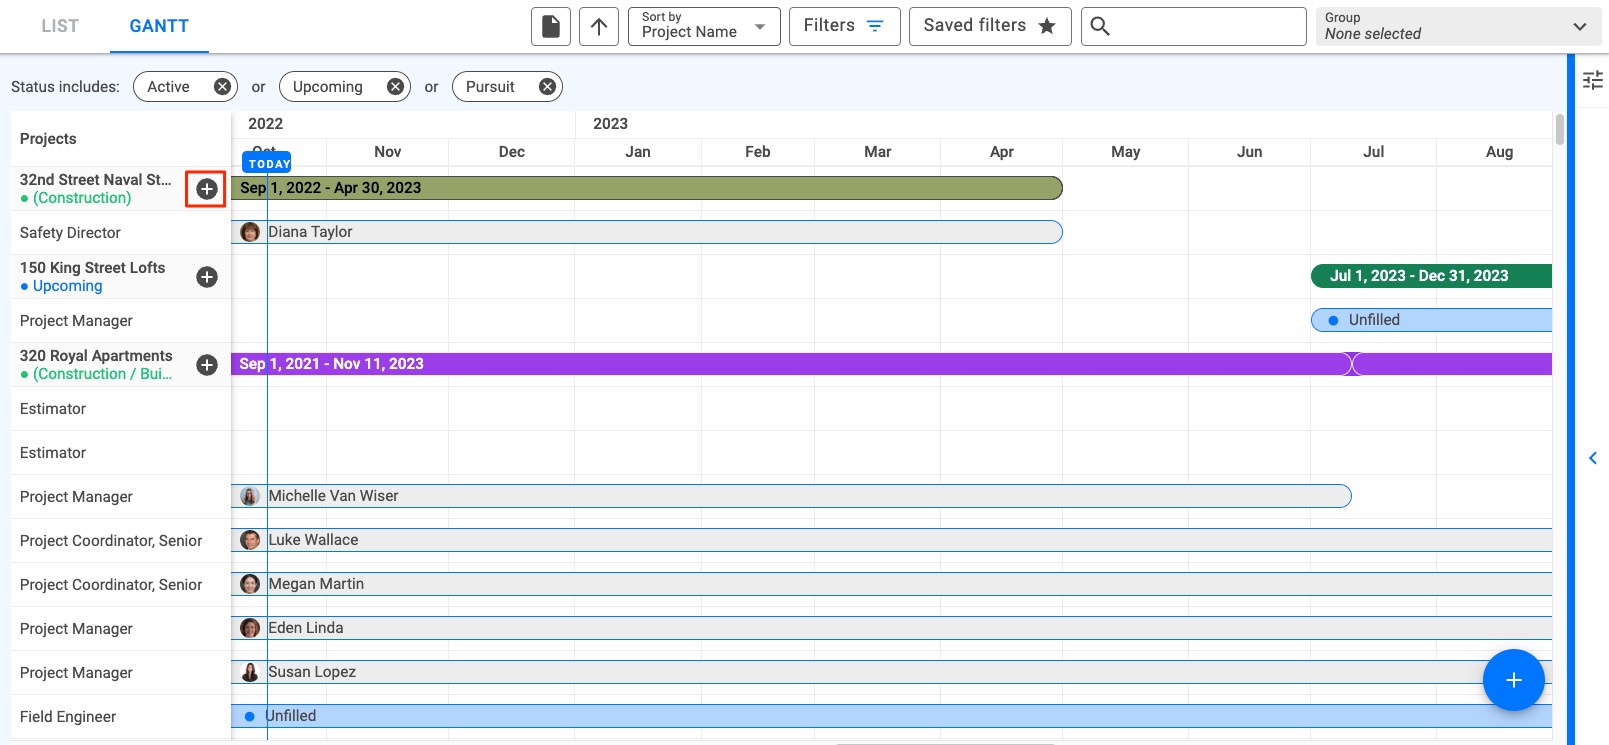 Article_Update_-_Managing_Roles_and_Allocations_From_the_Project_Gantt_-_1_2.jpg